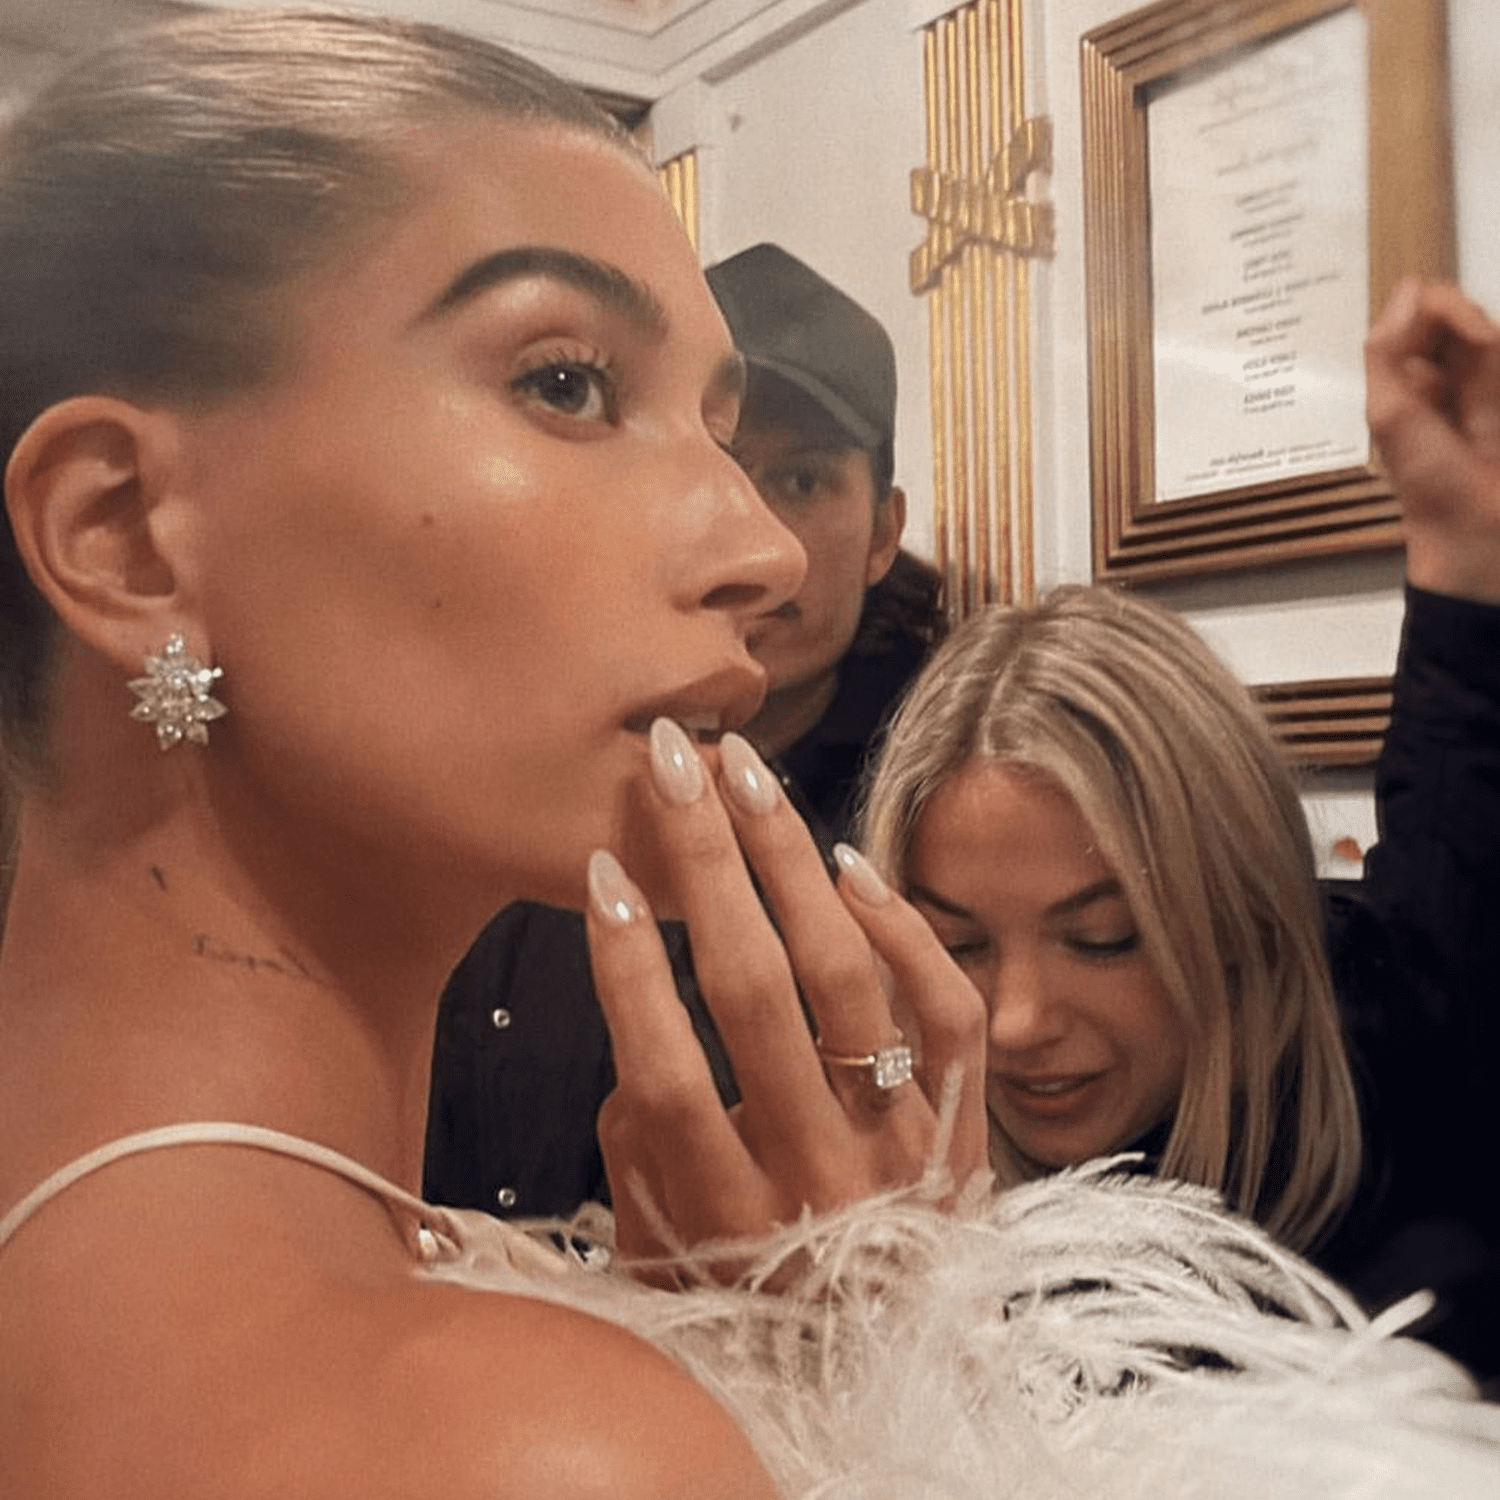 Hailey Bieber's finger close to her mouth as she attends an event